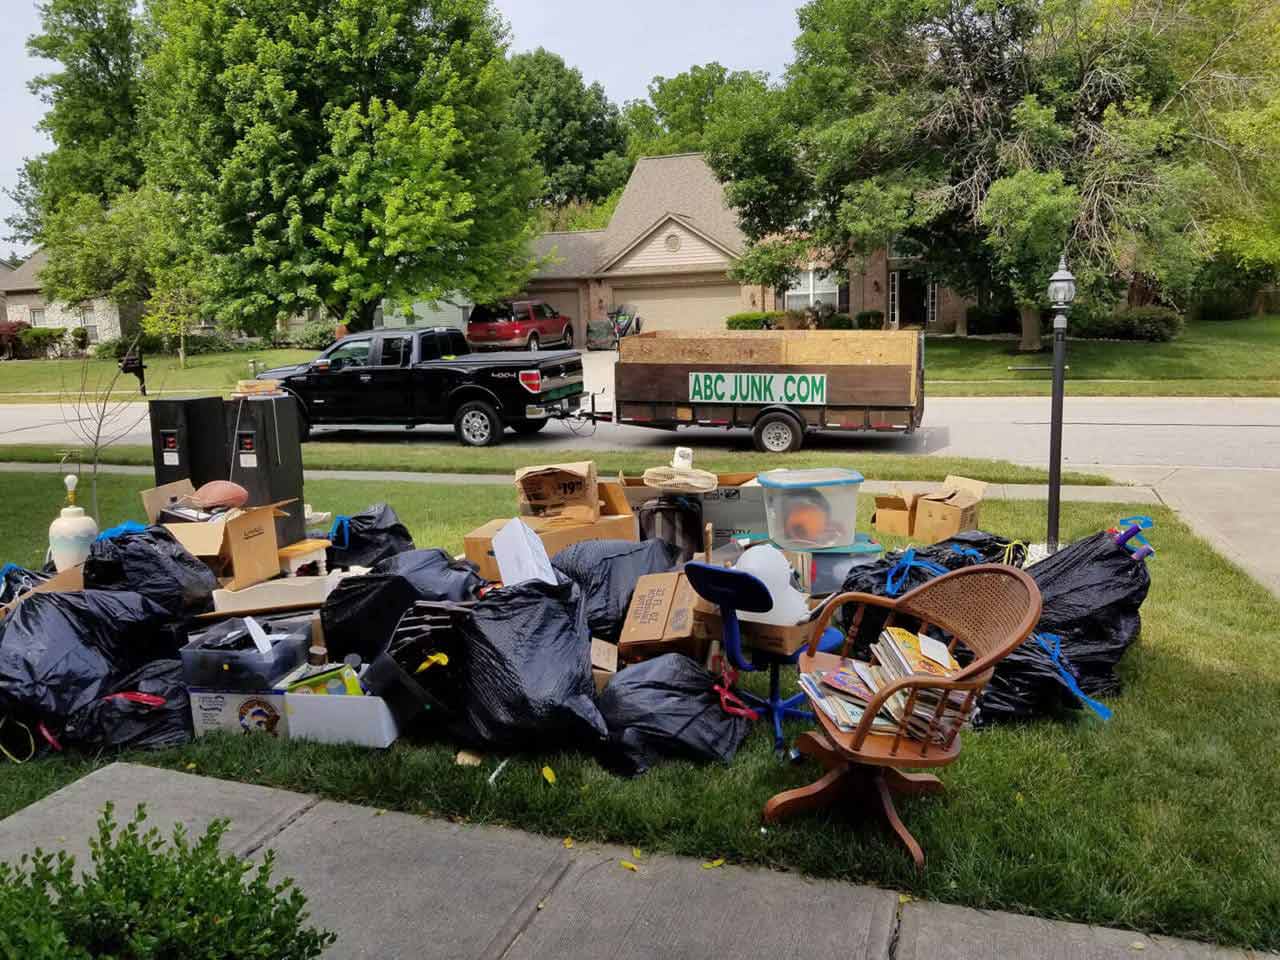 Free Junk Removal Versus Junk Removal Services